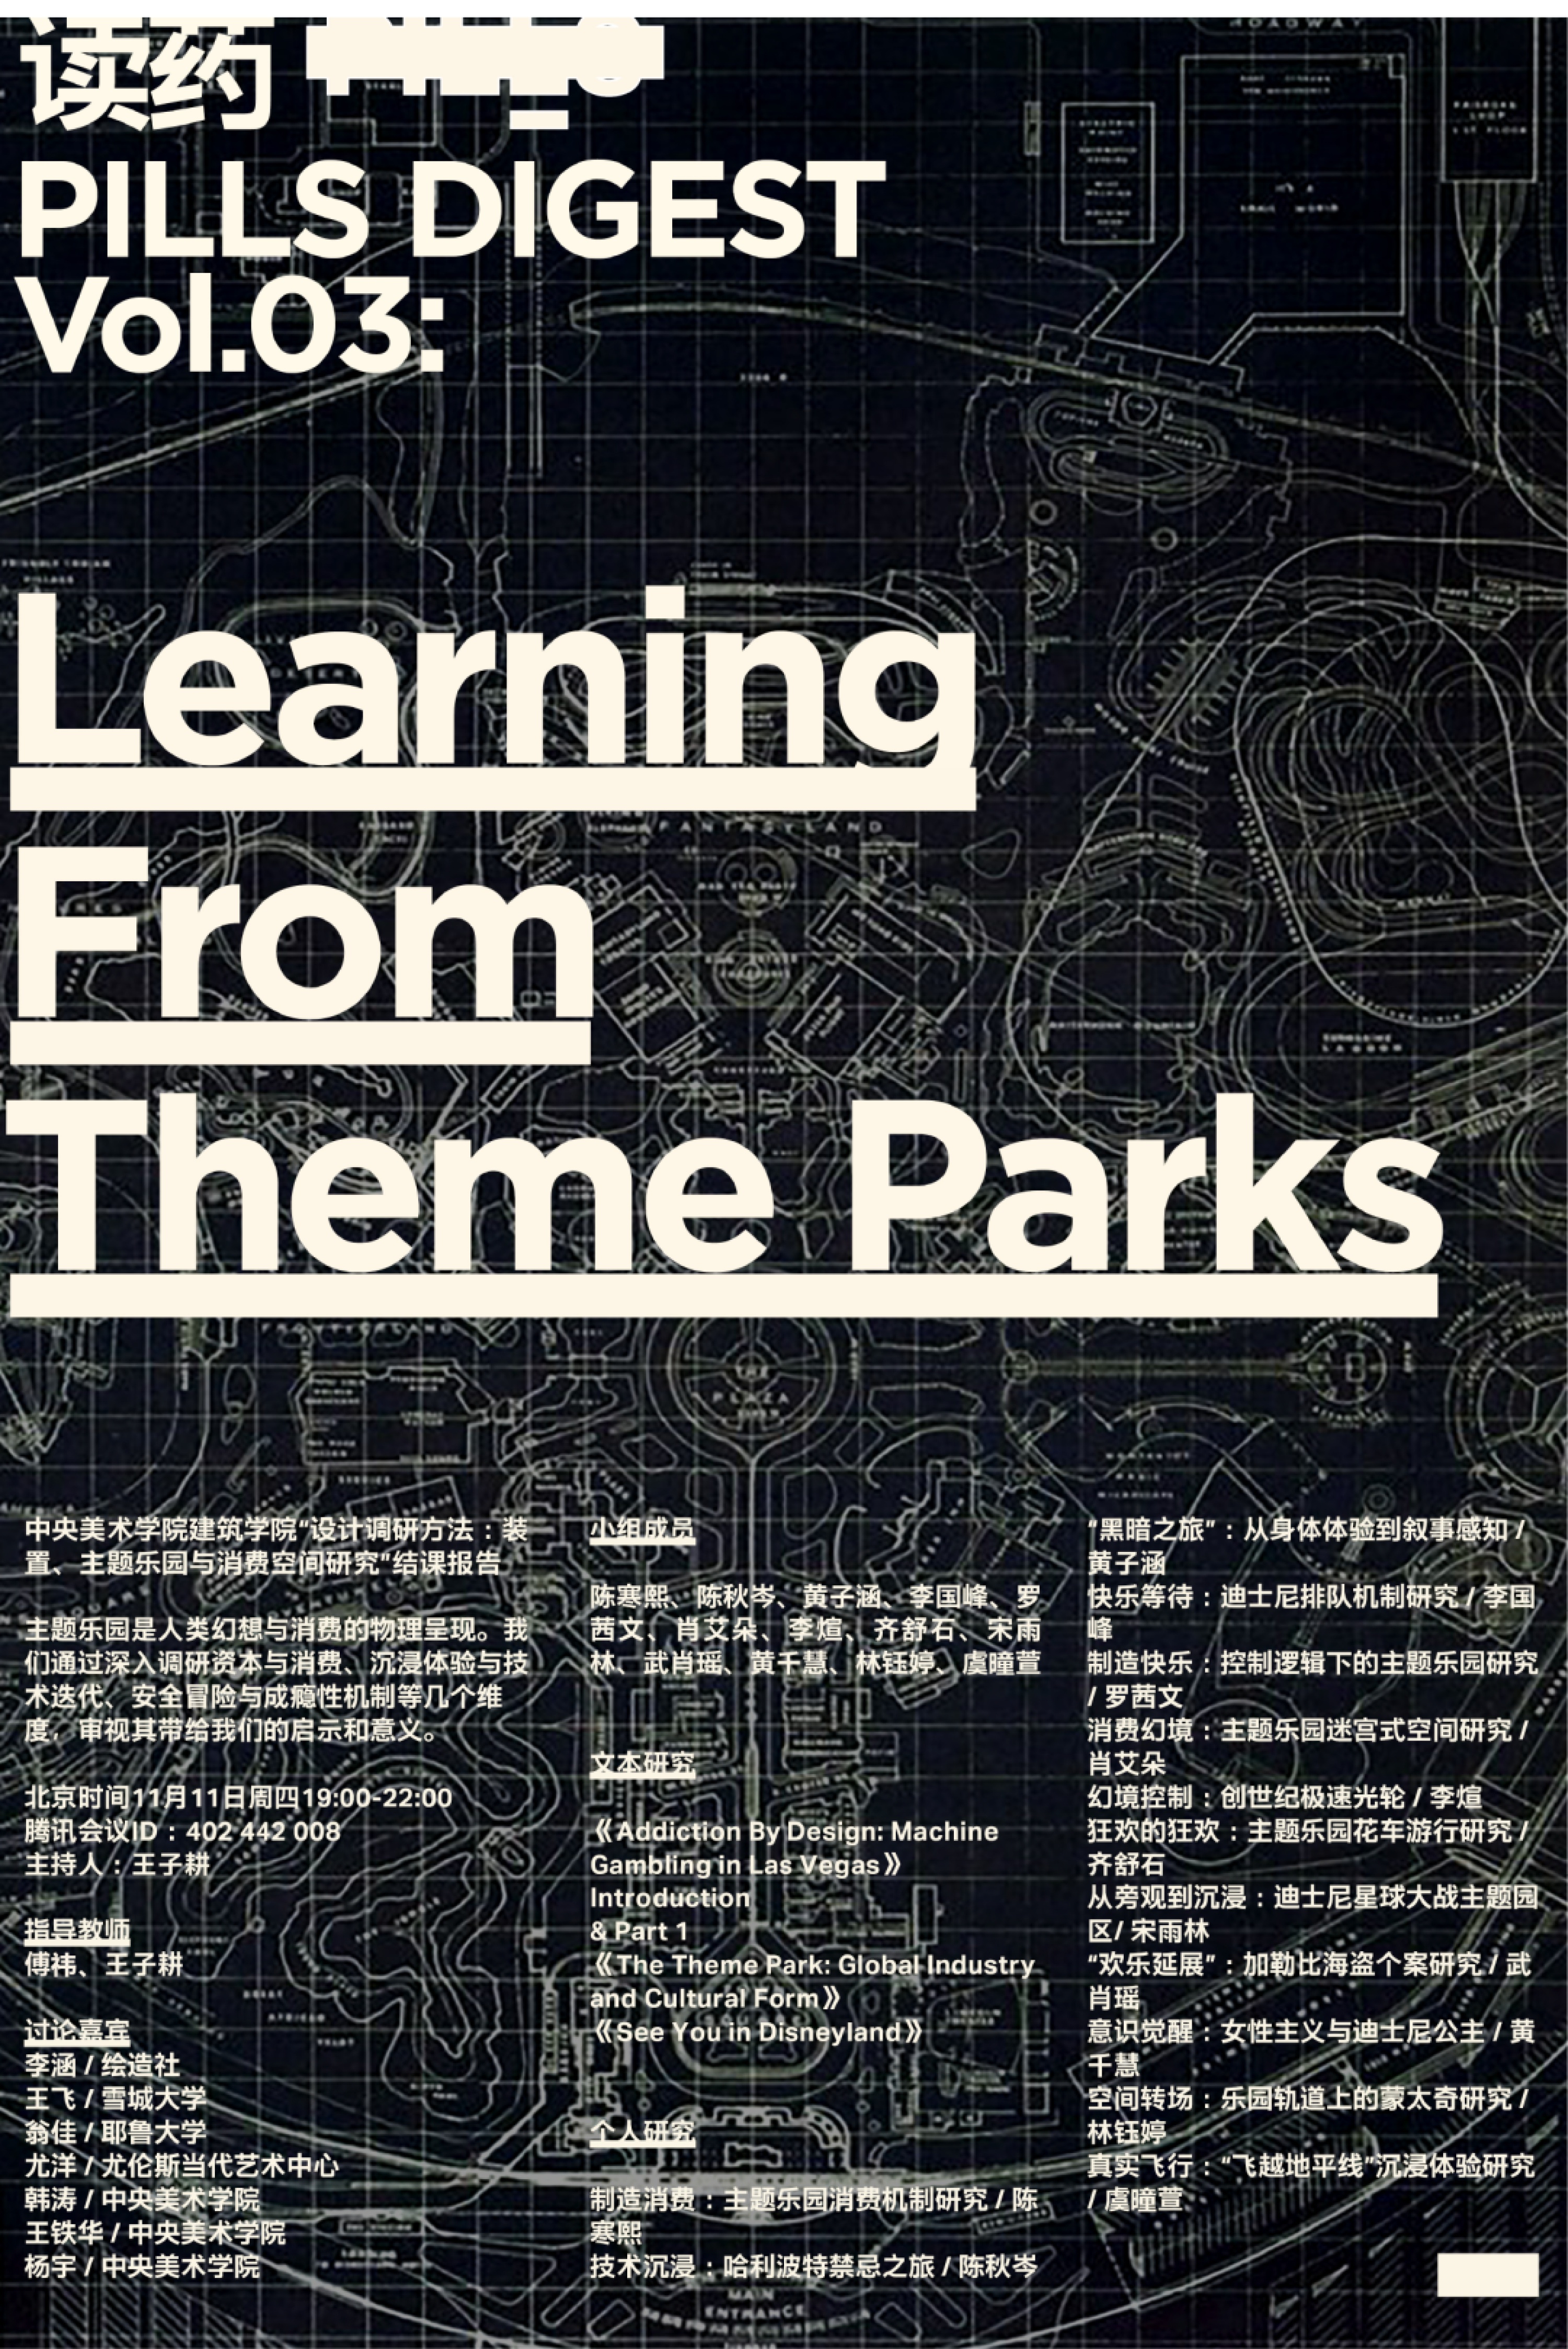 PILLS举办读书活动“读药” PILLS Digest Vol.03 《Learning From Theme Parks》